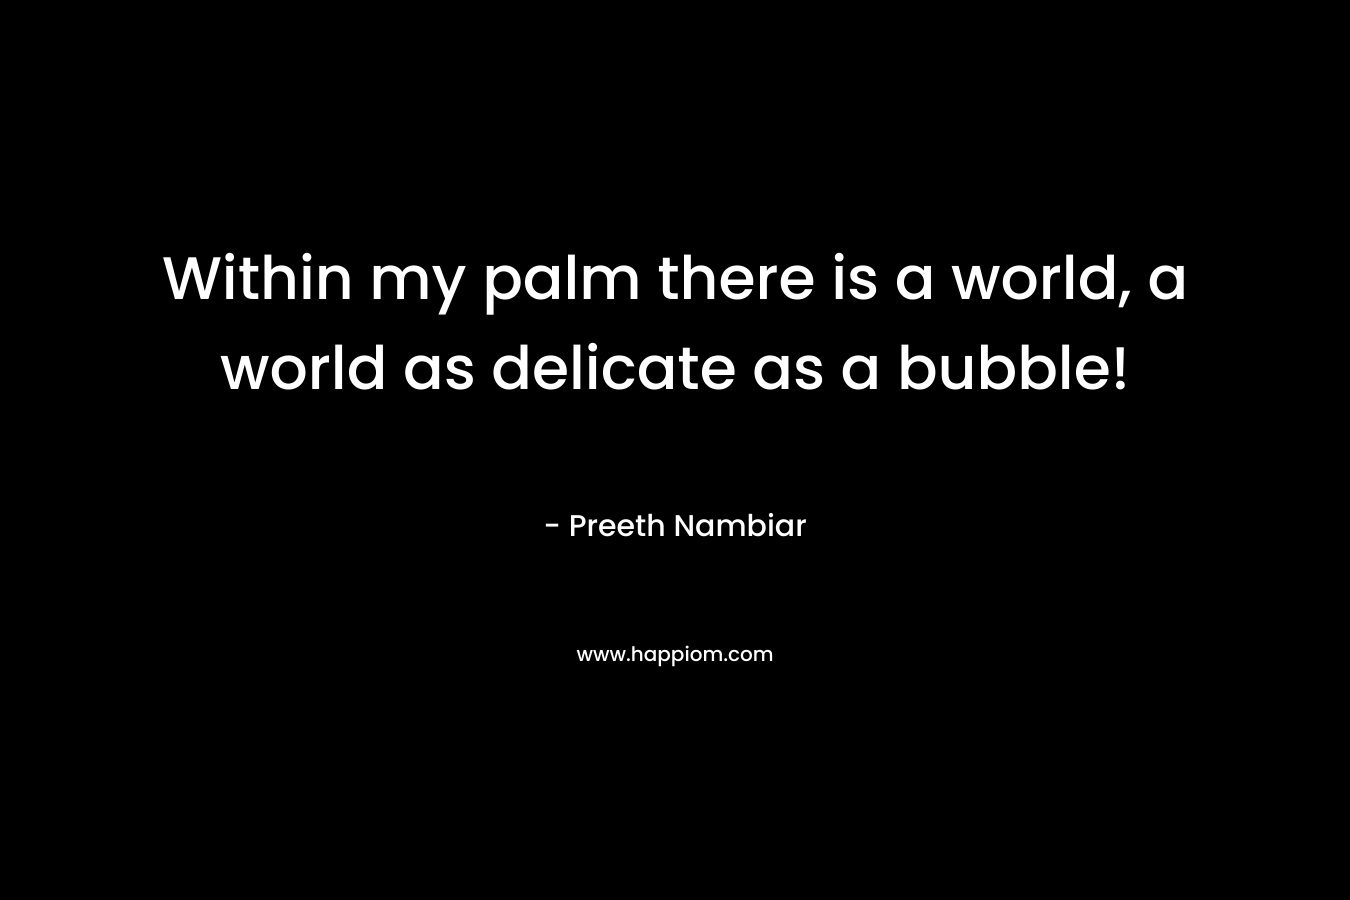 Within my palm there is a world, a world as delicate as a bubble!